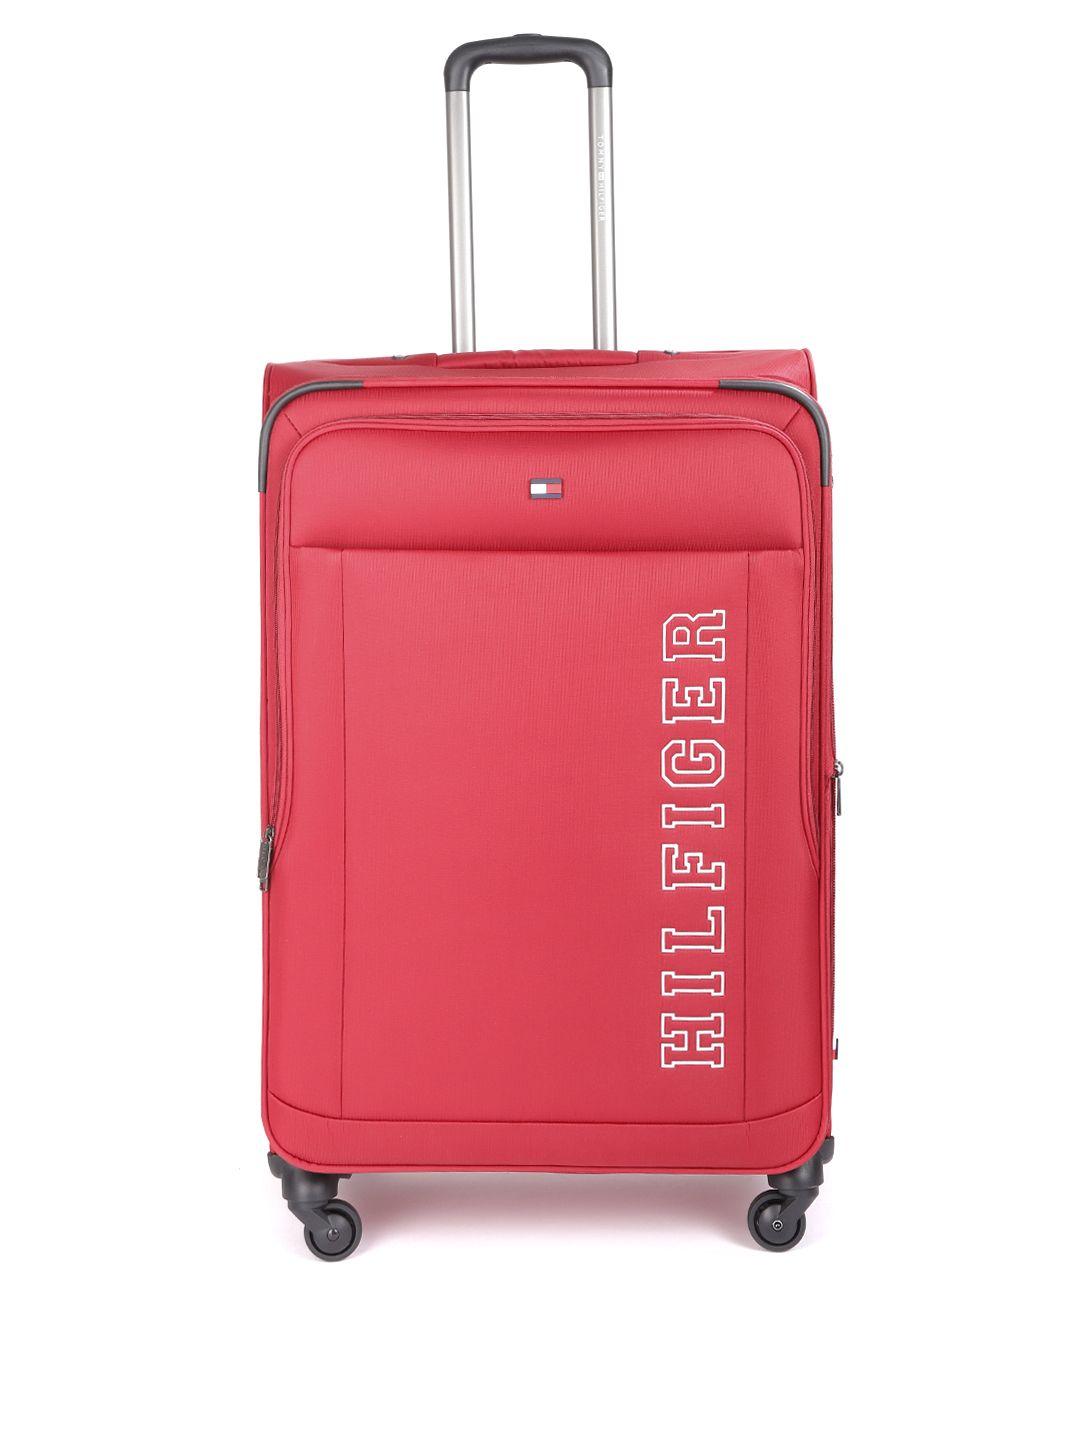 tommy hilfiger  red soft luggage 4-wheel 360-degree rotation large trolley suitcase